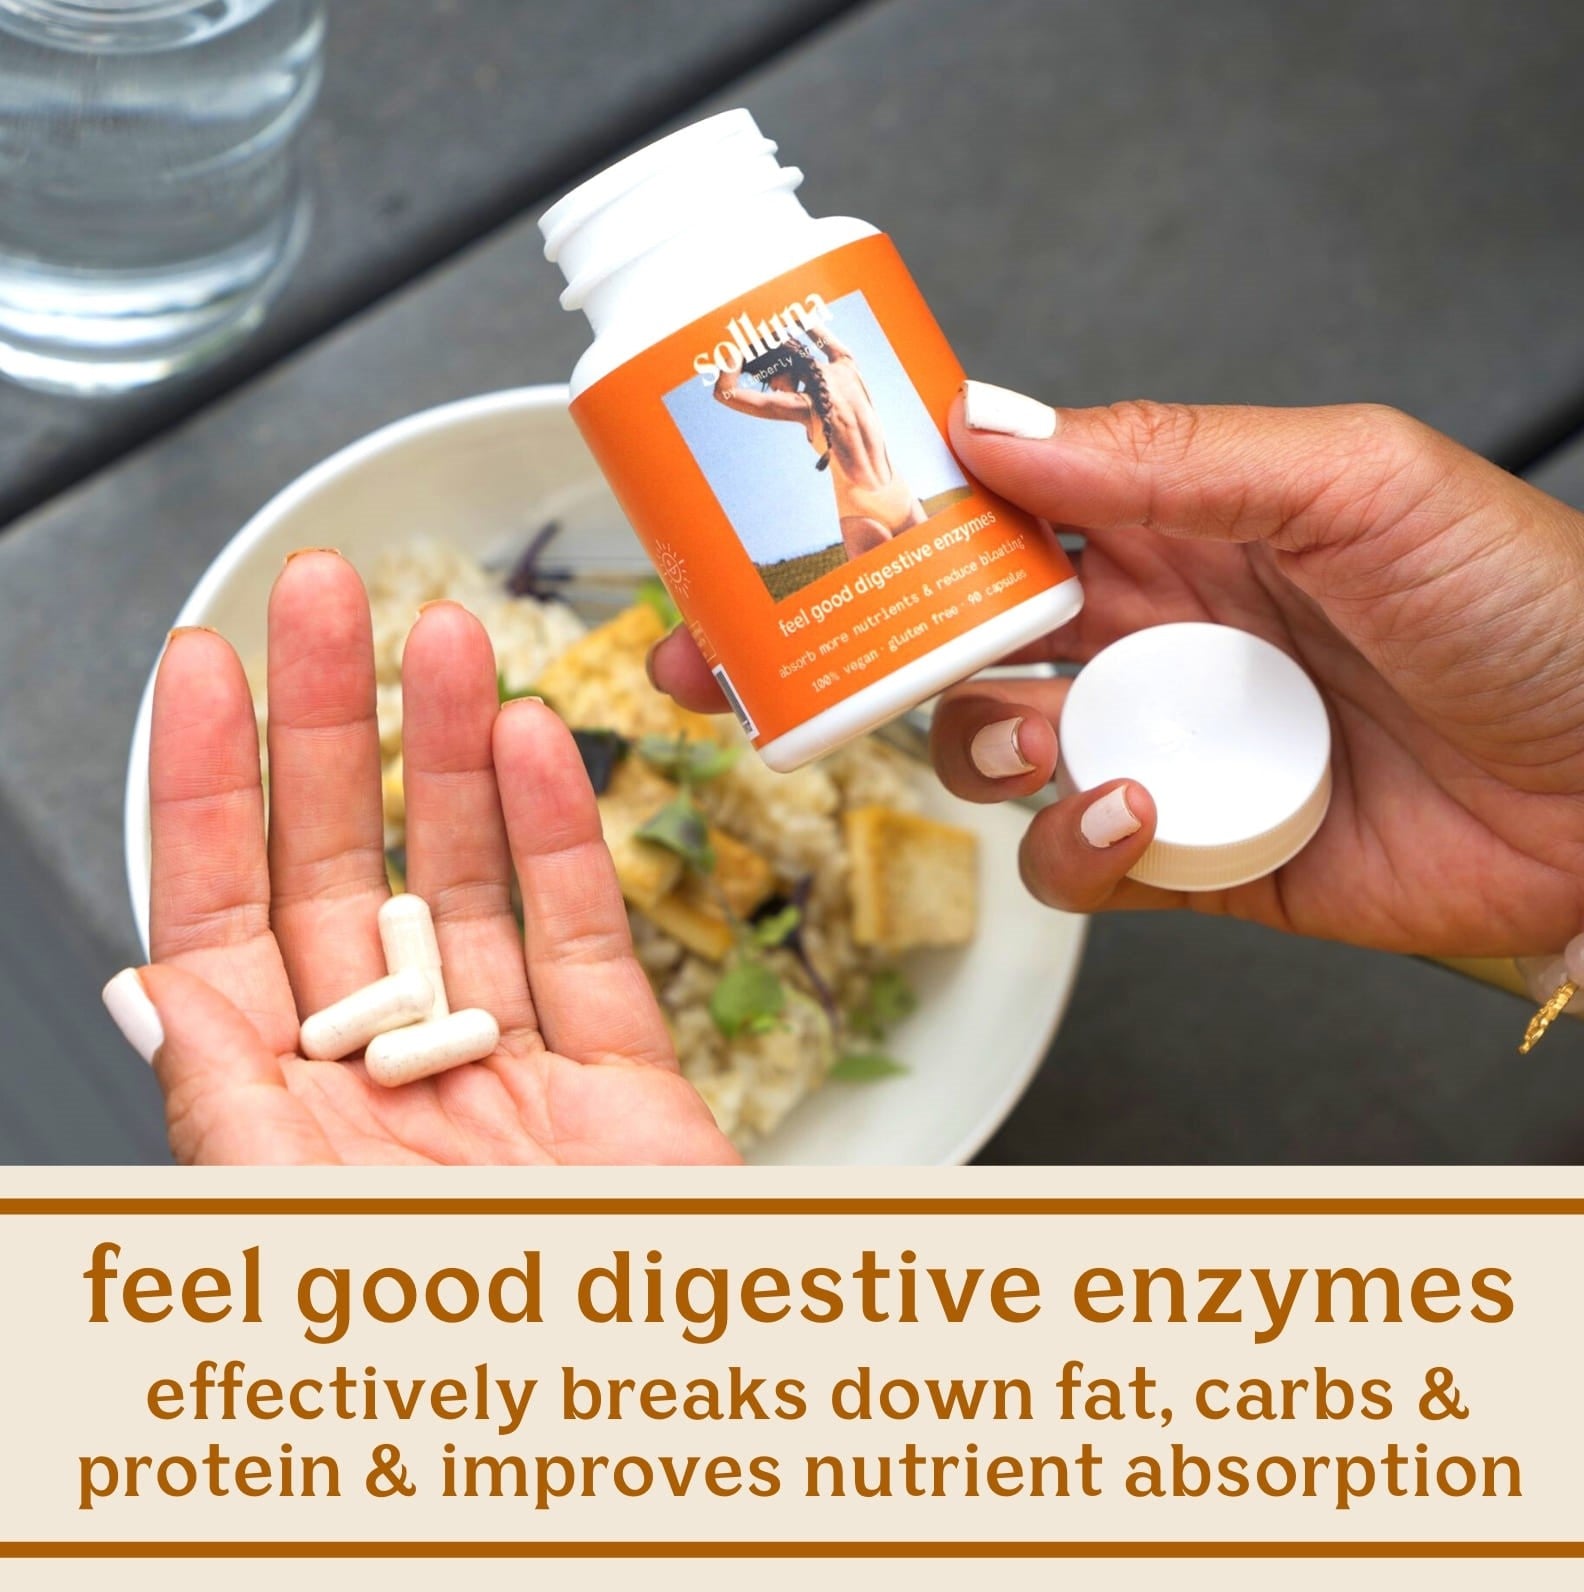 Solluna's Feel Good Digestive Enzymes Effectively Breaks Down Fat, Carbs & Protein & Improves Nutriet Absorption